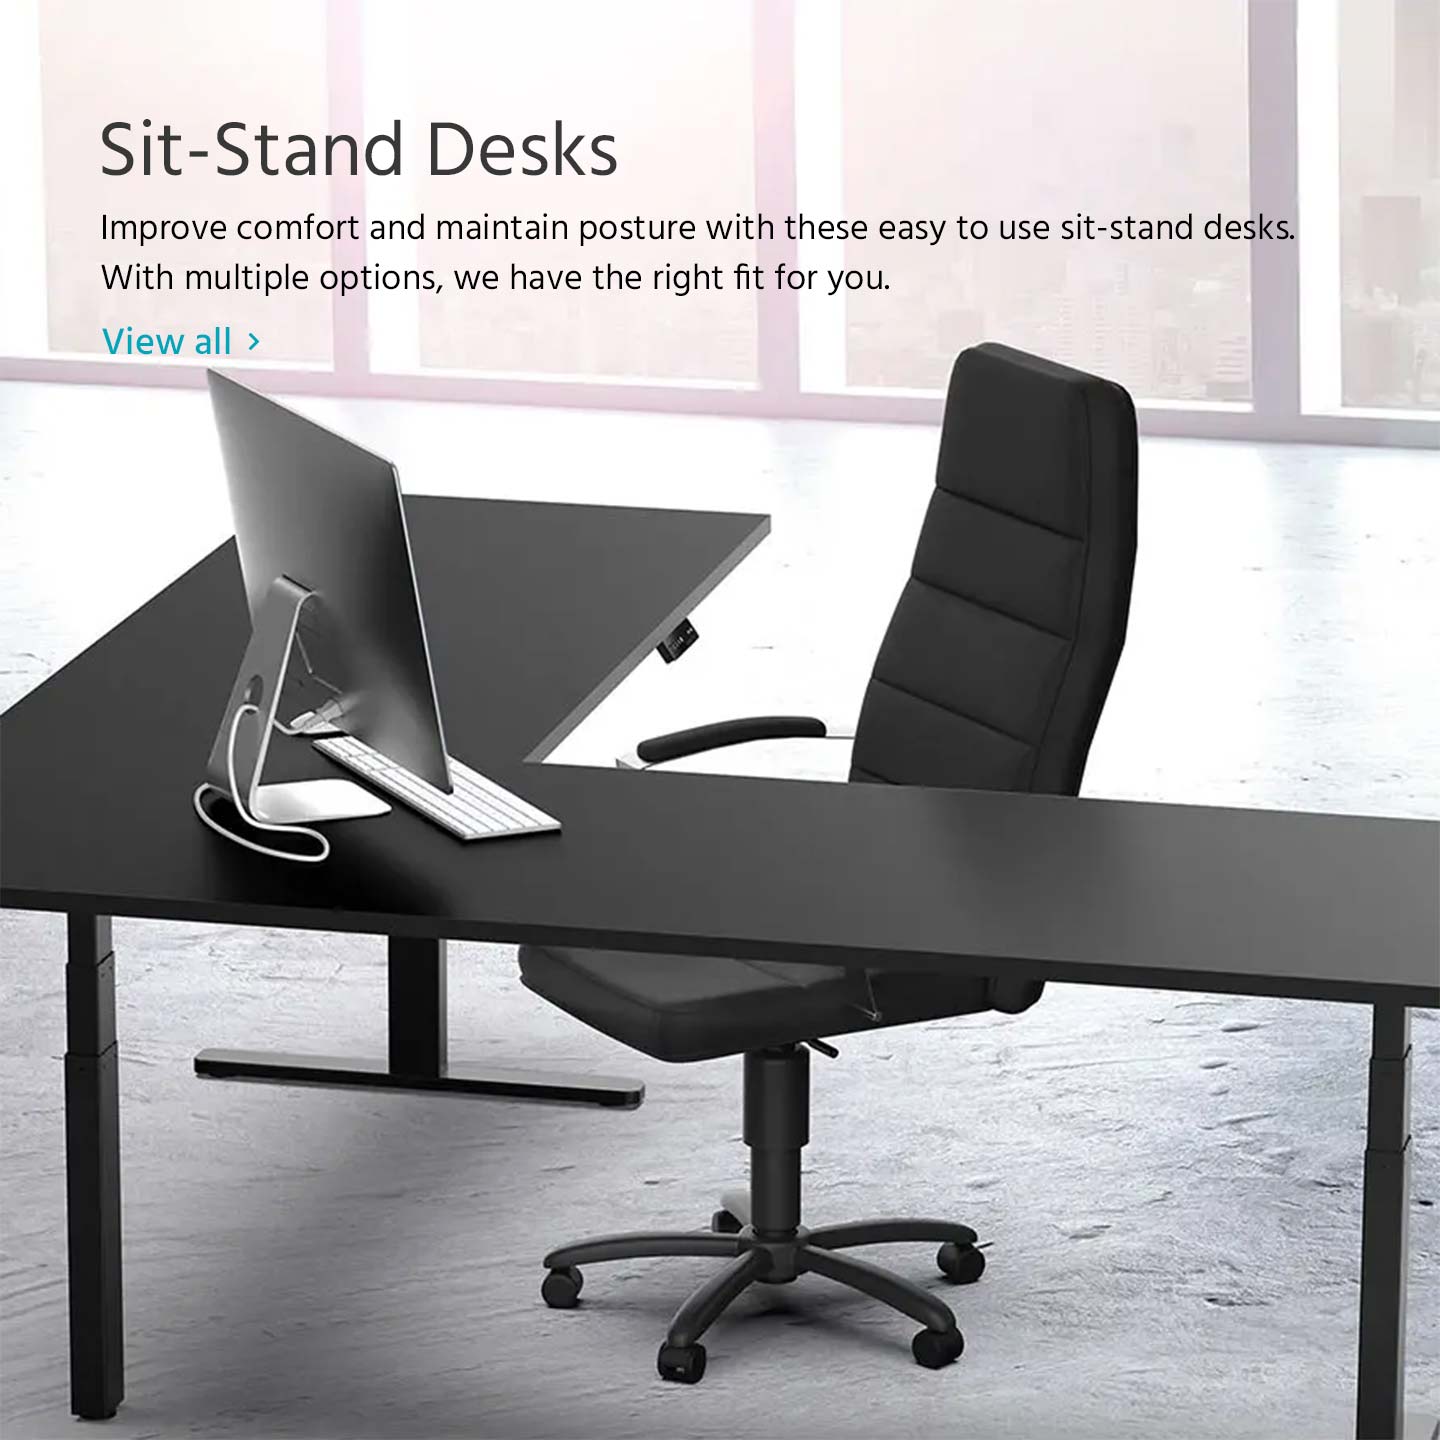 Sit-stand desks - Improve comfort and maintain posture with these easy to use sit-stand desks. With multiple options, we have the right fit for you. View All